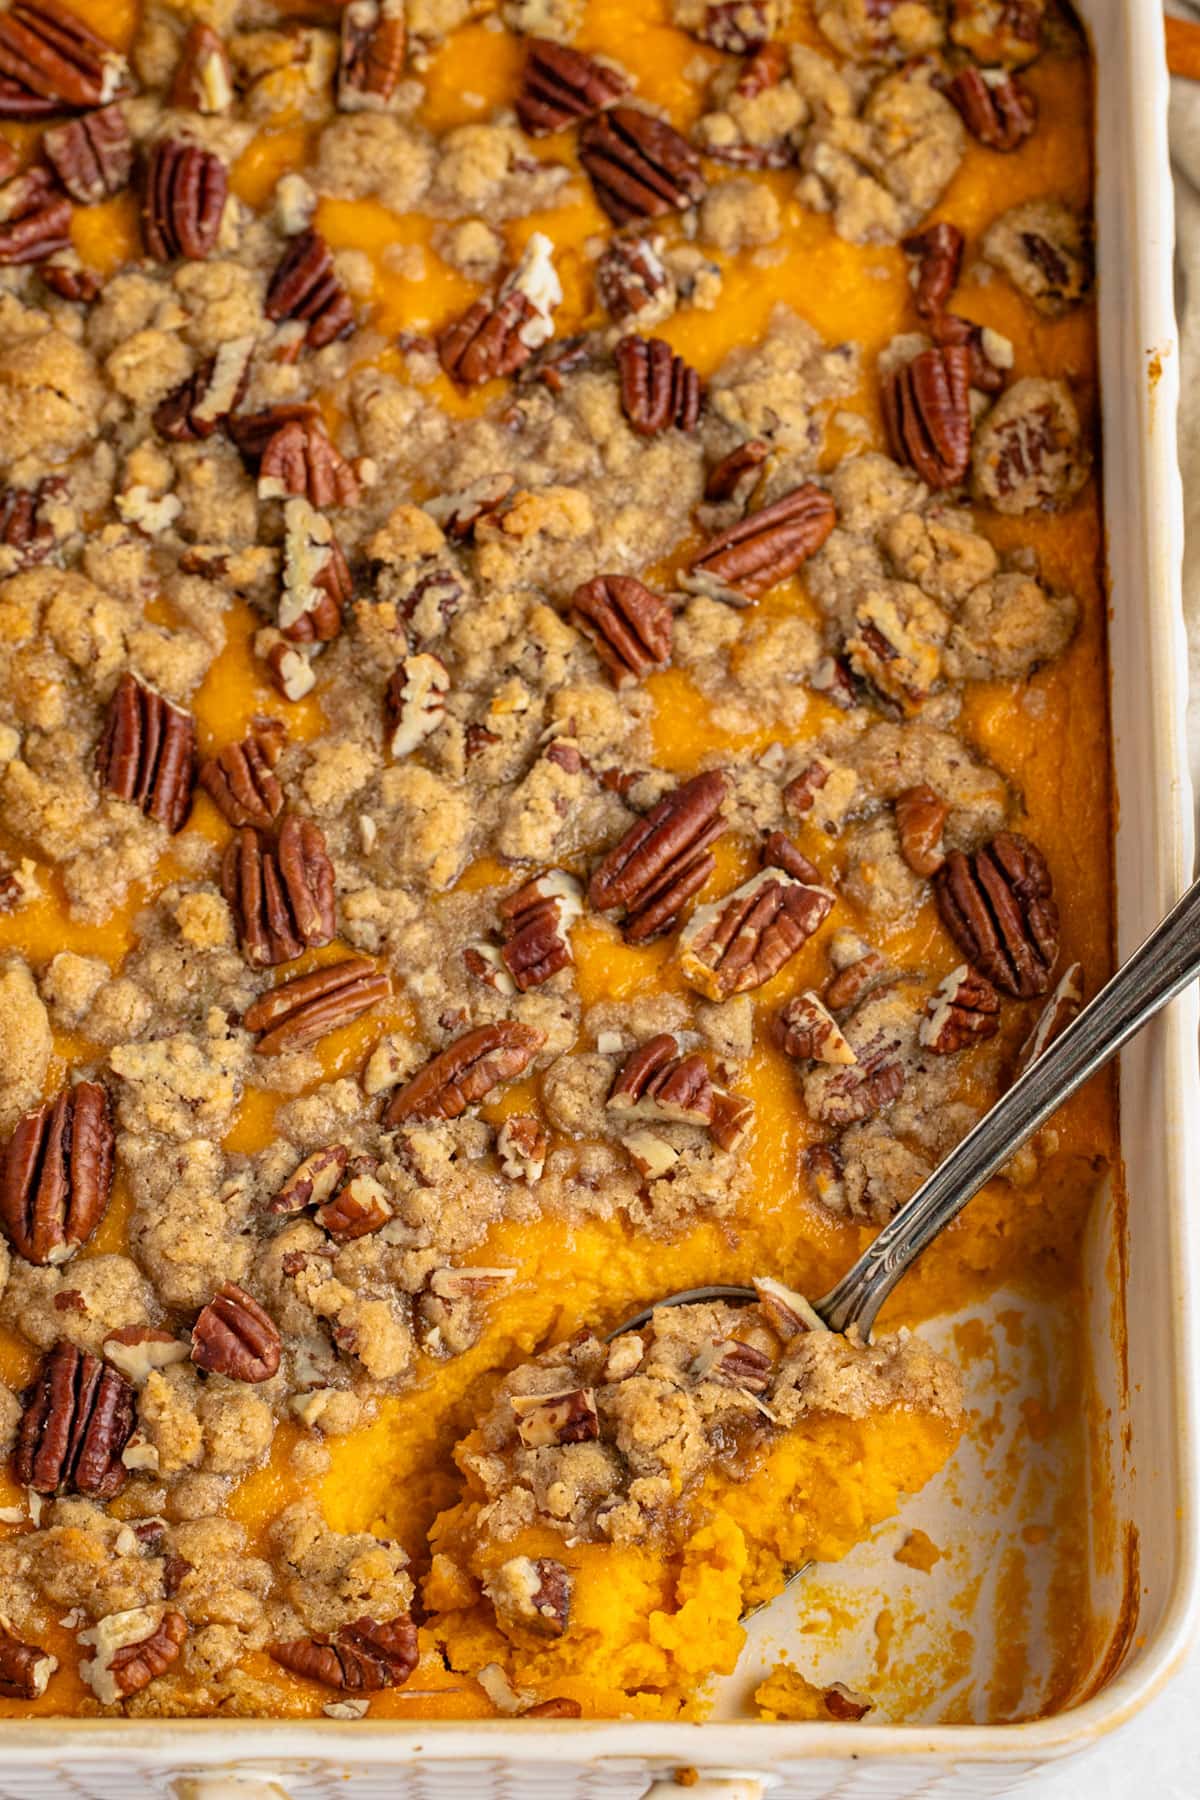 A large pan holding sweet potato pudding topped with pecans with a spoonful of pudding taken out of the pan.